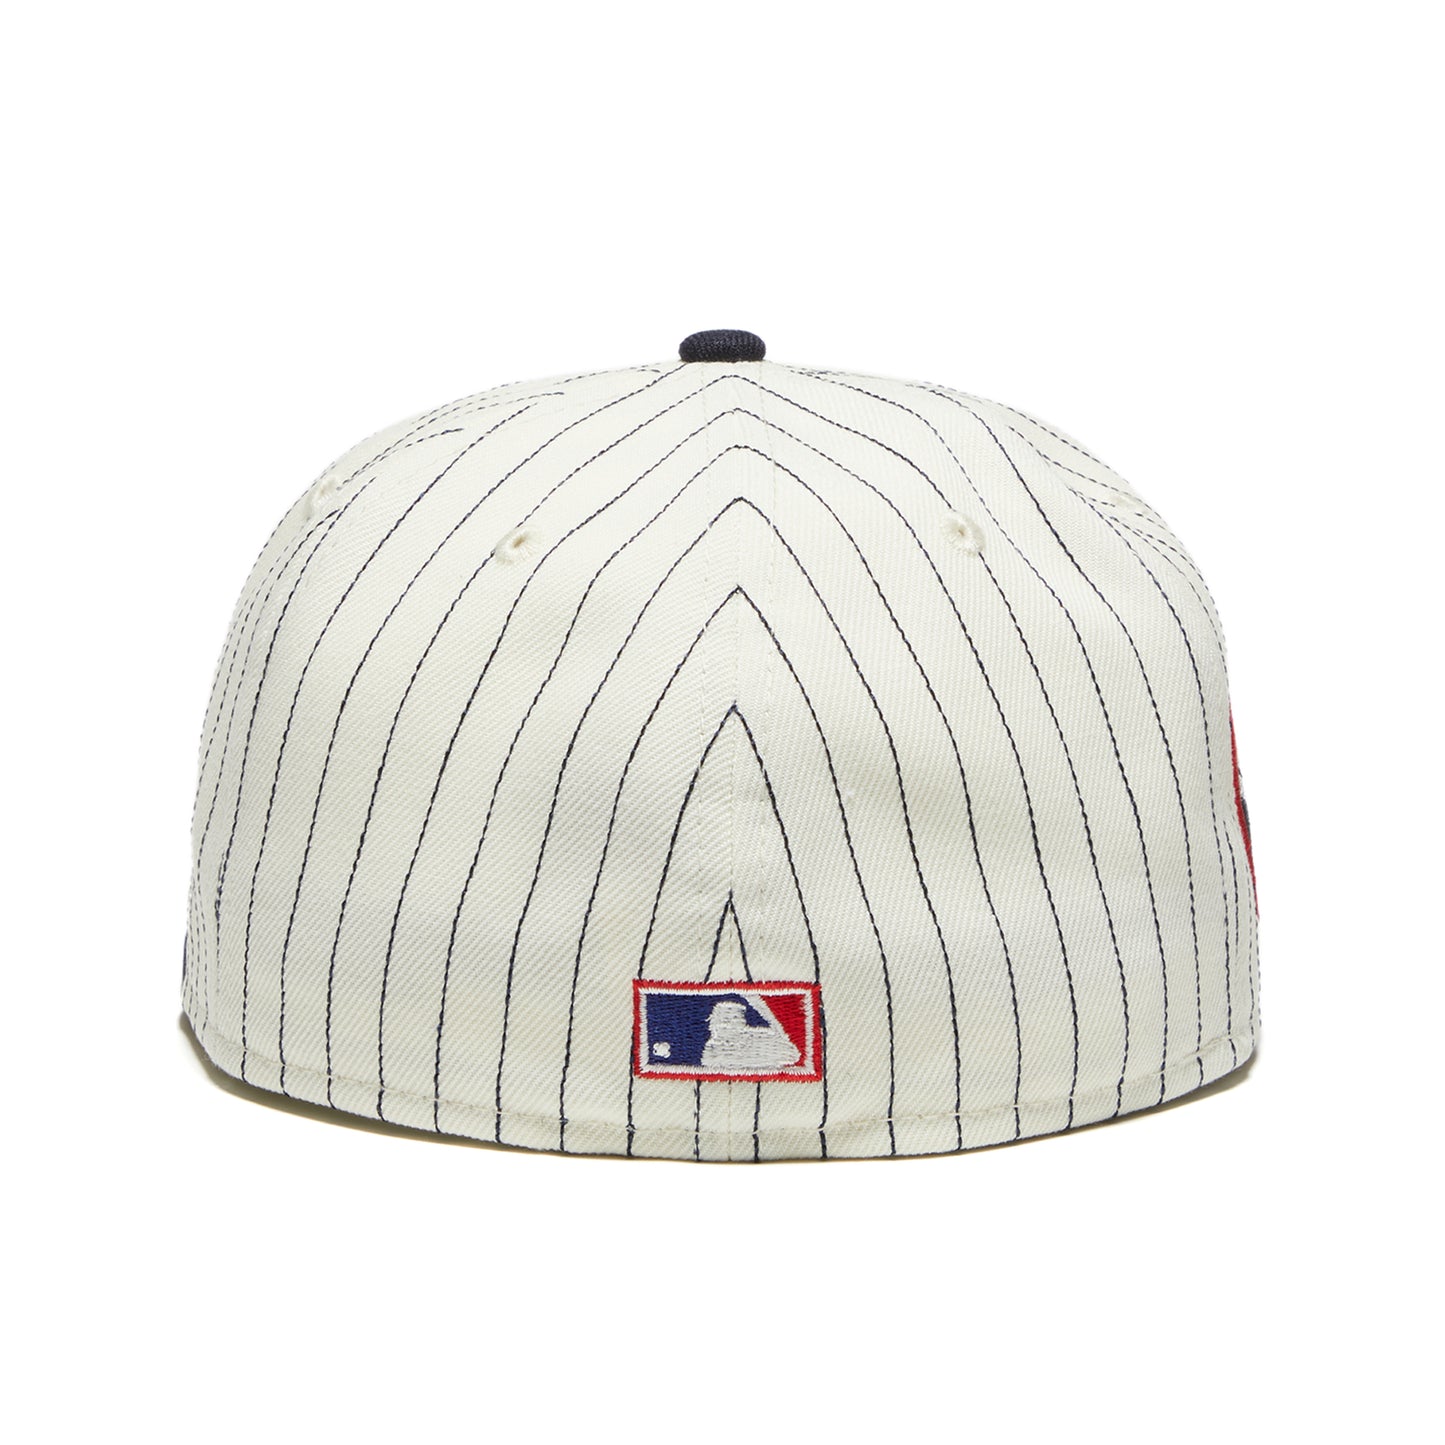 New Era New York Yankees 59Fifty Fitted Hat (Cream/Navy)